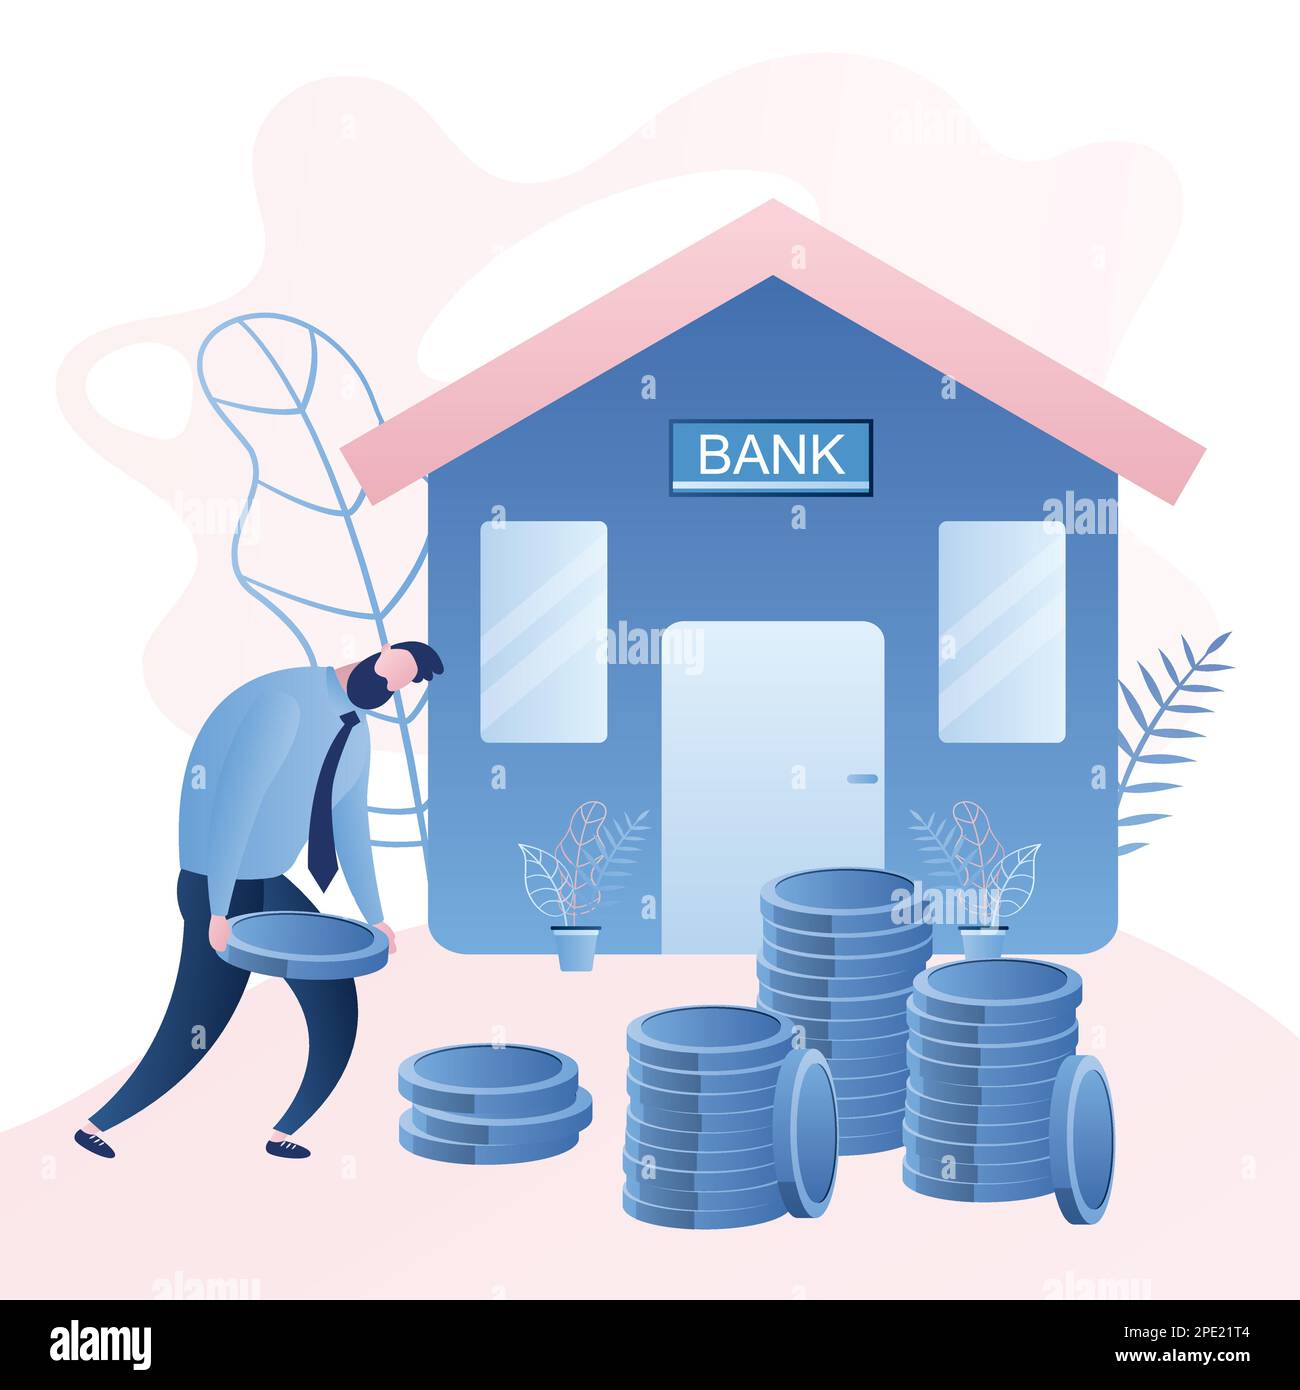 Unhappy businessman carries coins to the bank building. Loan repayment or bank slavery concept. Male character in trendy style. Vector illustration Stock Vector